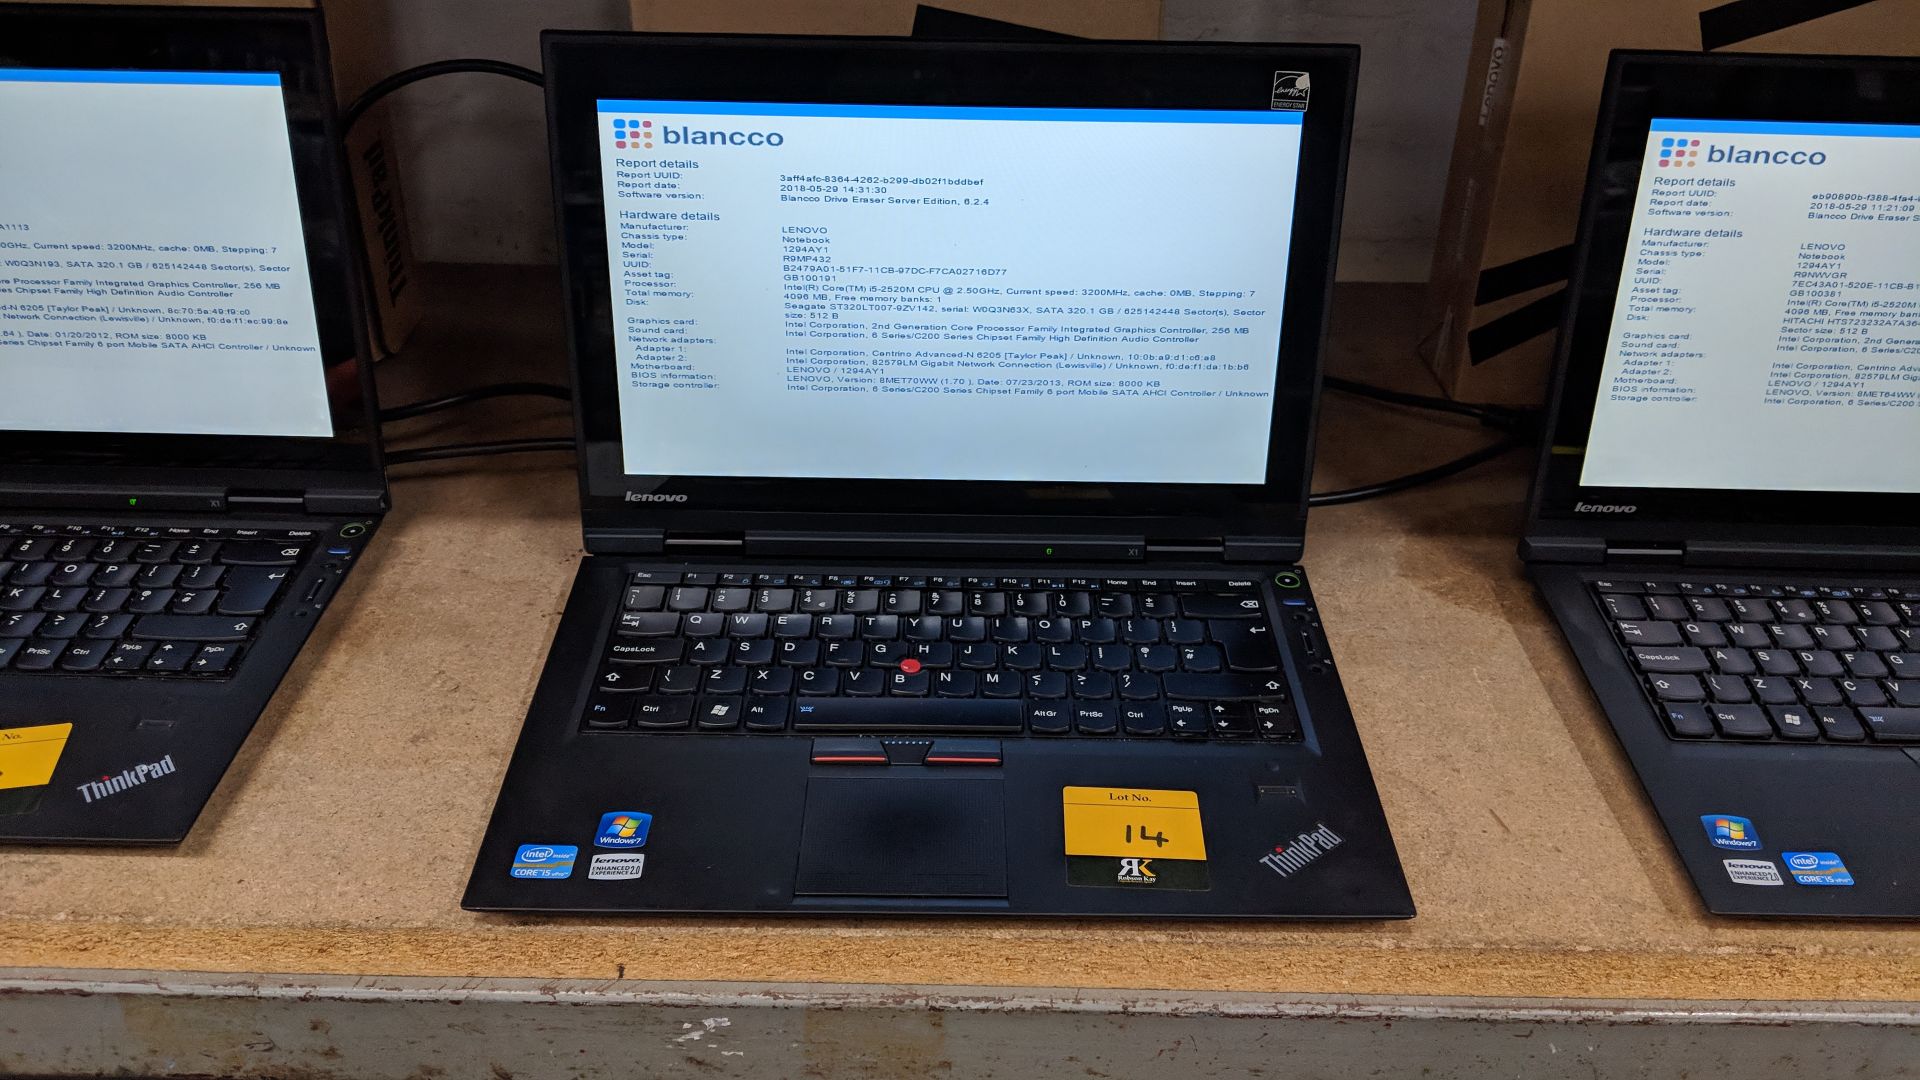 Lenovo ThinkPad X1 notebook computer, model 1294AY1 with built-in webcam. Intel Core i5-2520M CPU@